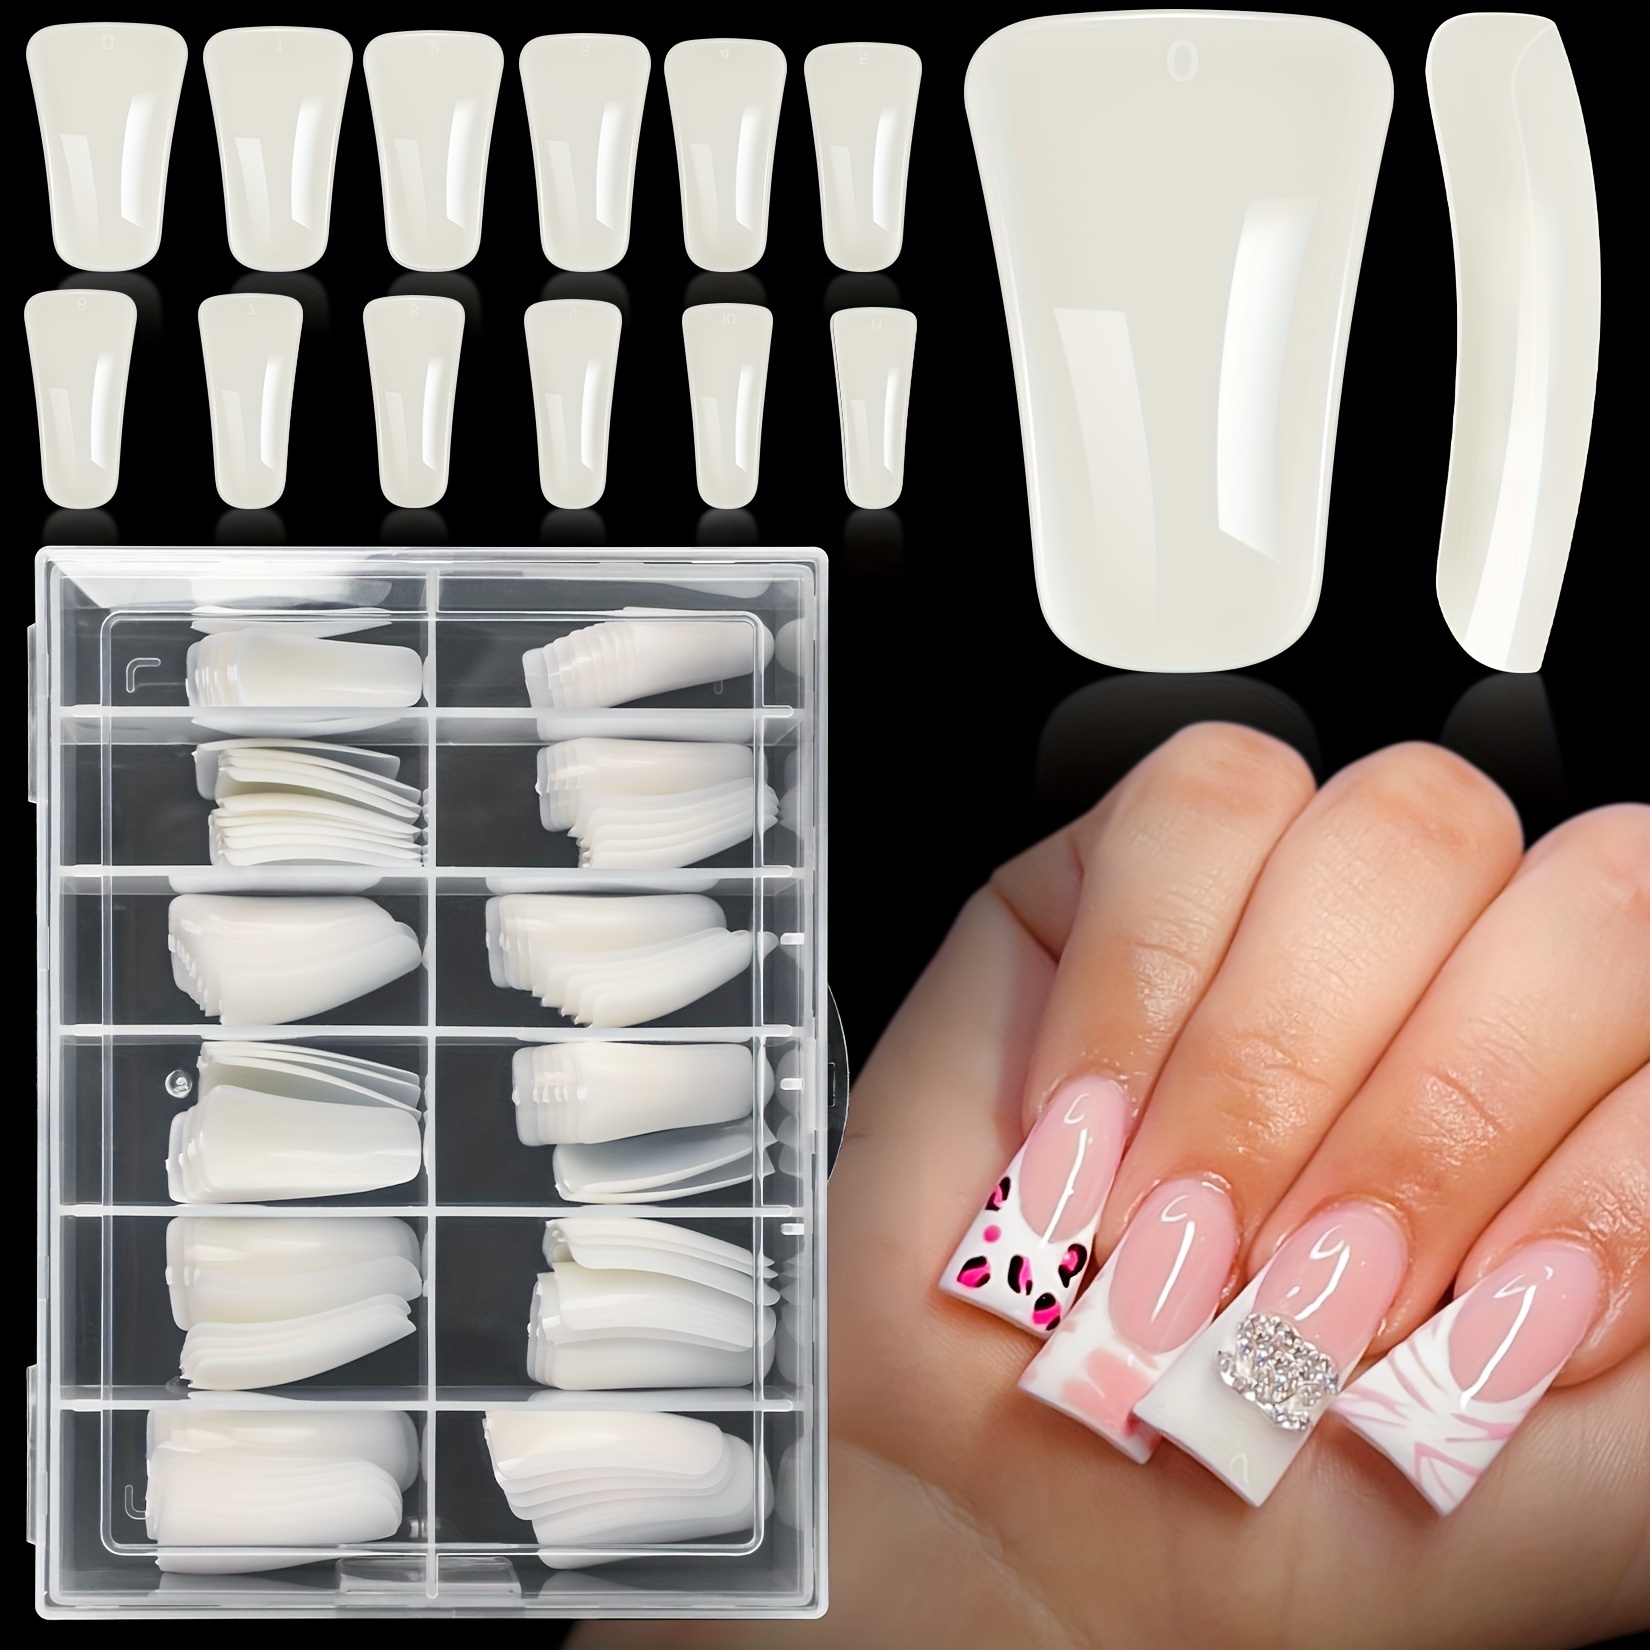 Amazon.com: KXAMELIE Press on Toenails Short Fake Toe Nails Square Acrylic  Nails for Toes Glossy White French Tip Toe Nails Glue on with Floral Design  Natural Nude Fake Nails Solid Color in